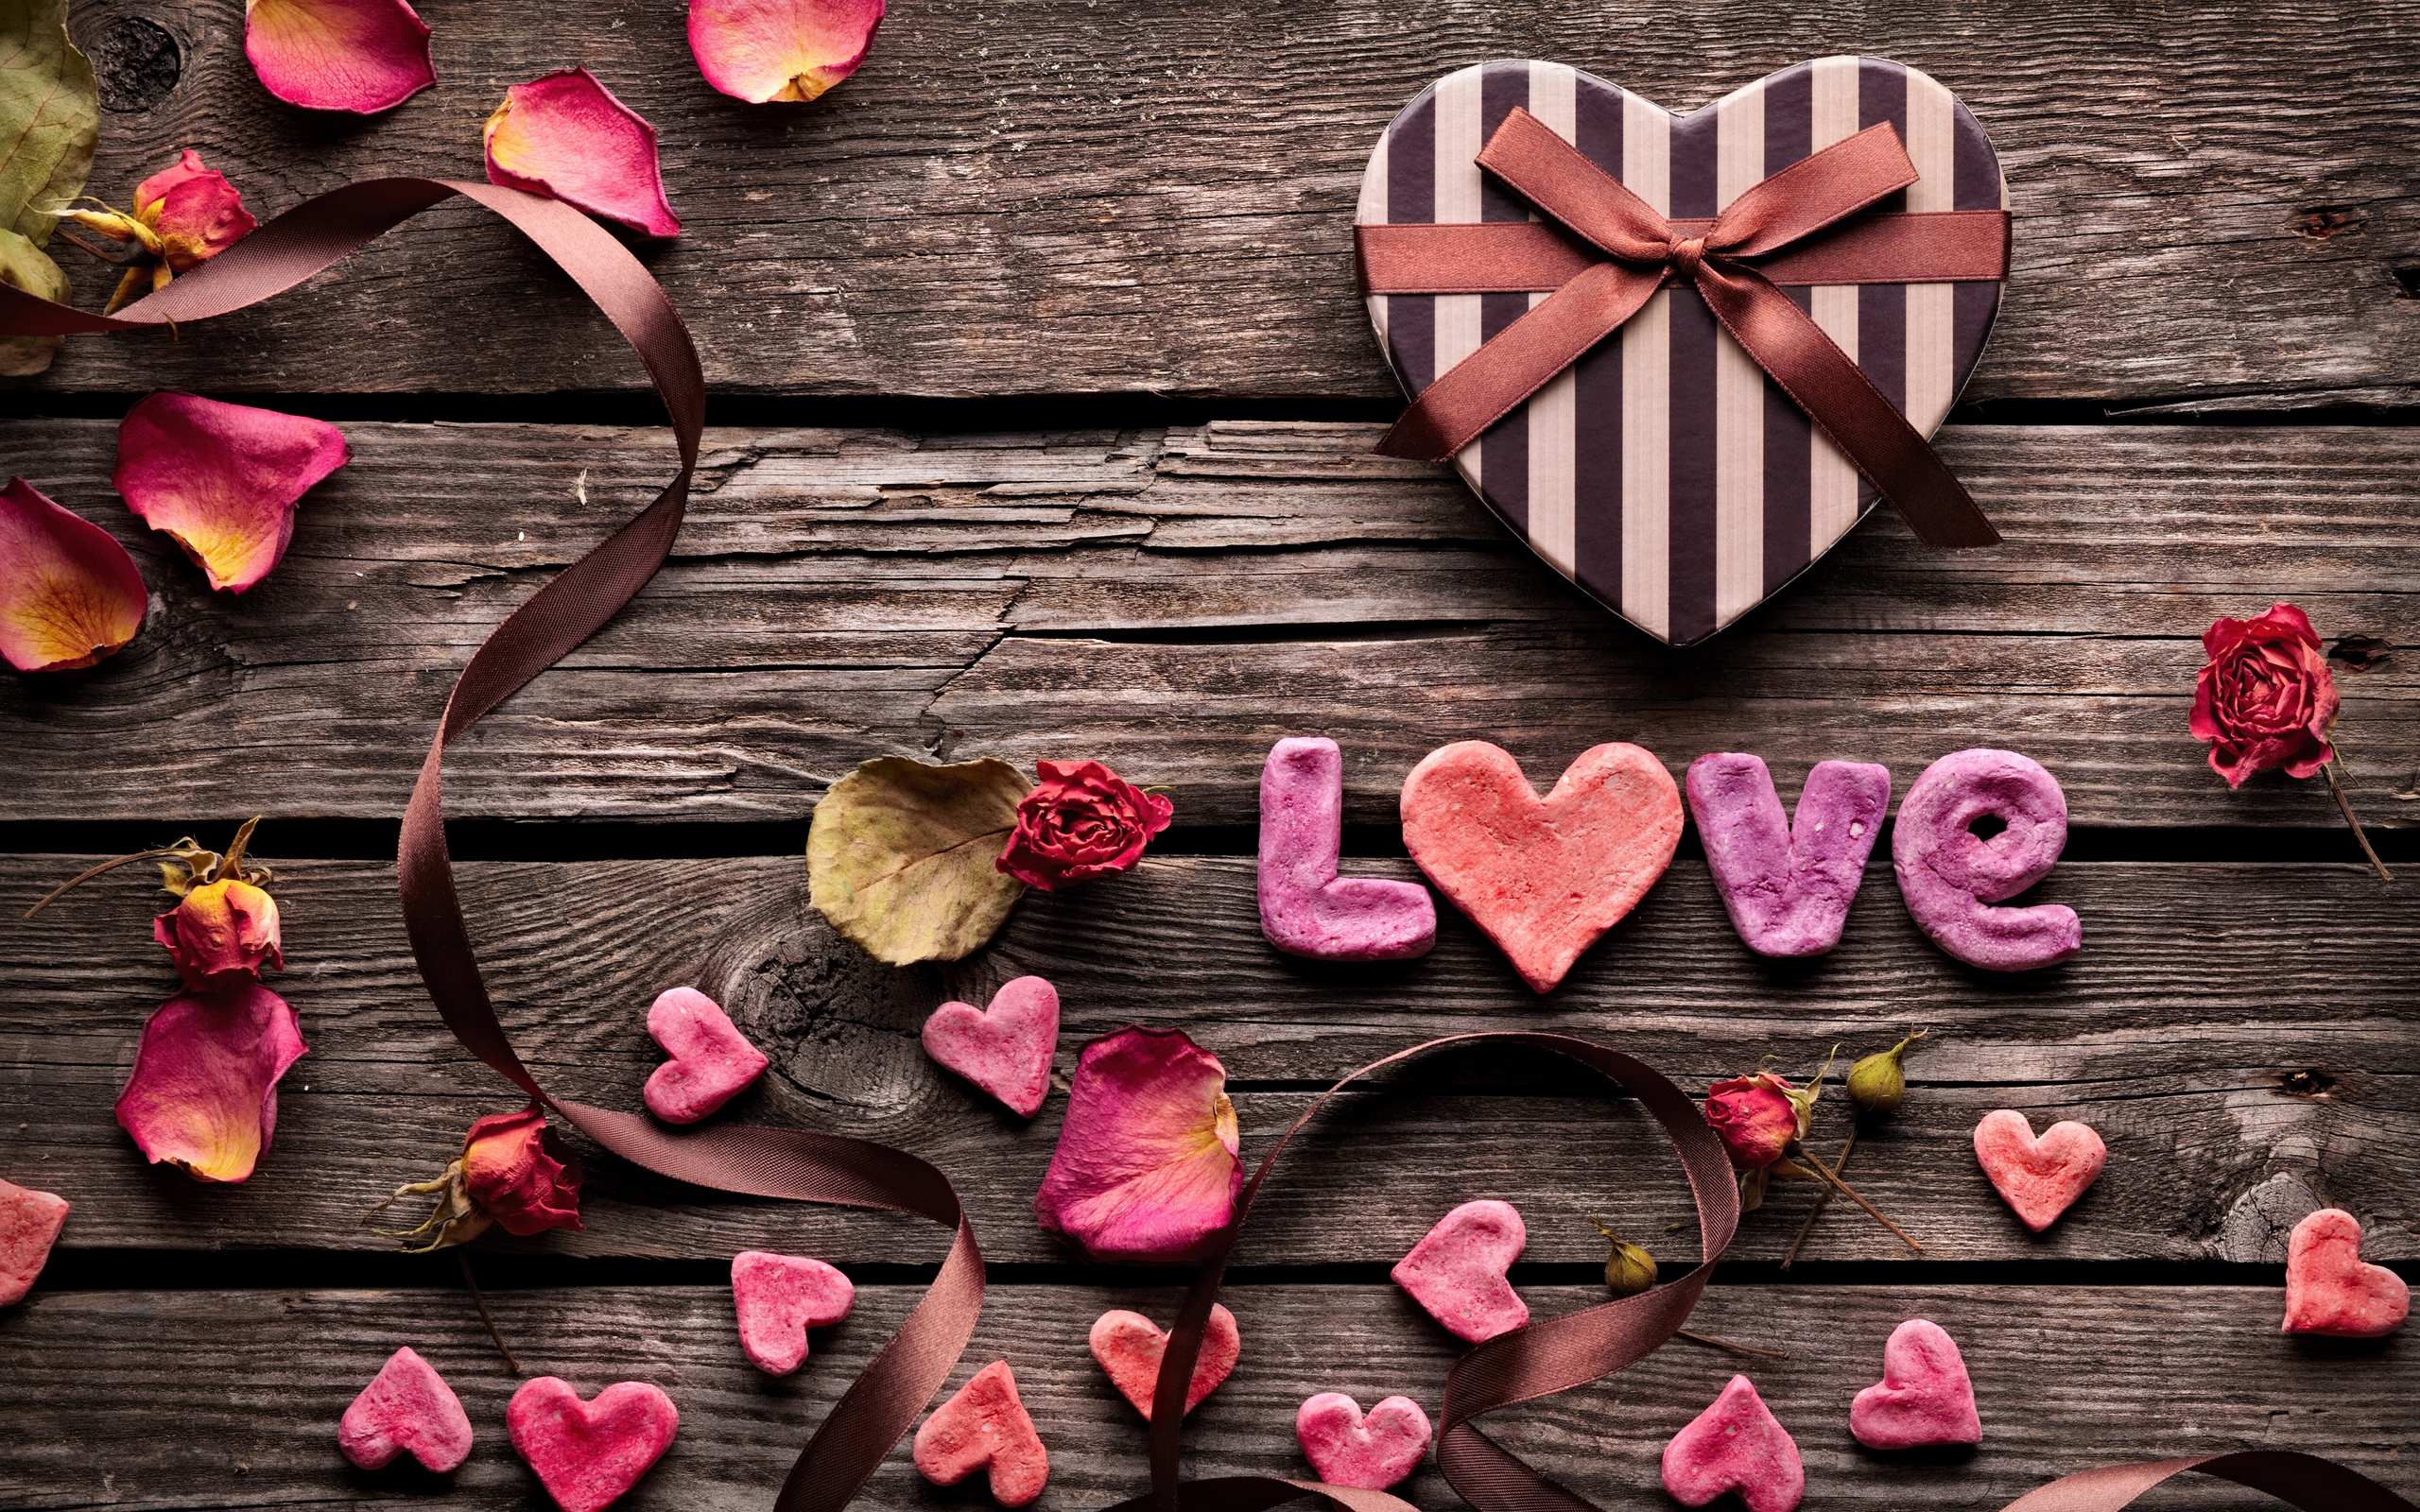 Download 2560x1600 Valentine's Day, Love, Wood, Heart, Leaves, Petals, Romance Wallpaper for MacBook Pro 13 inch